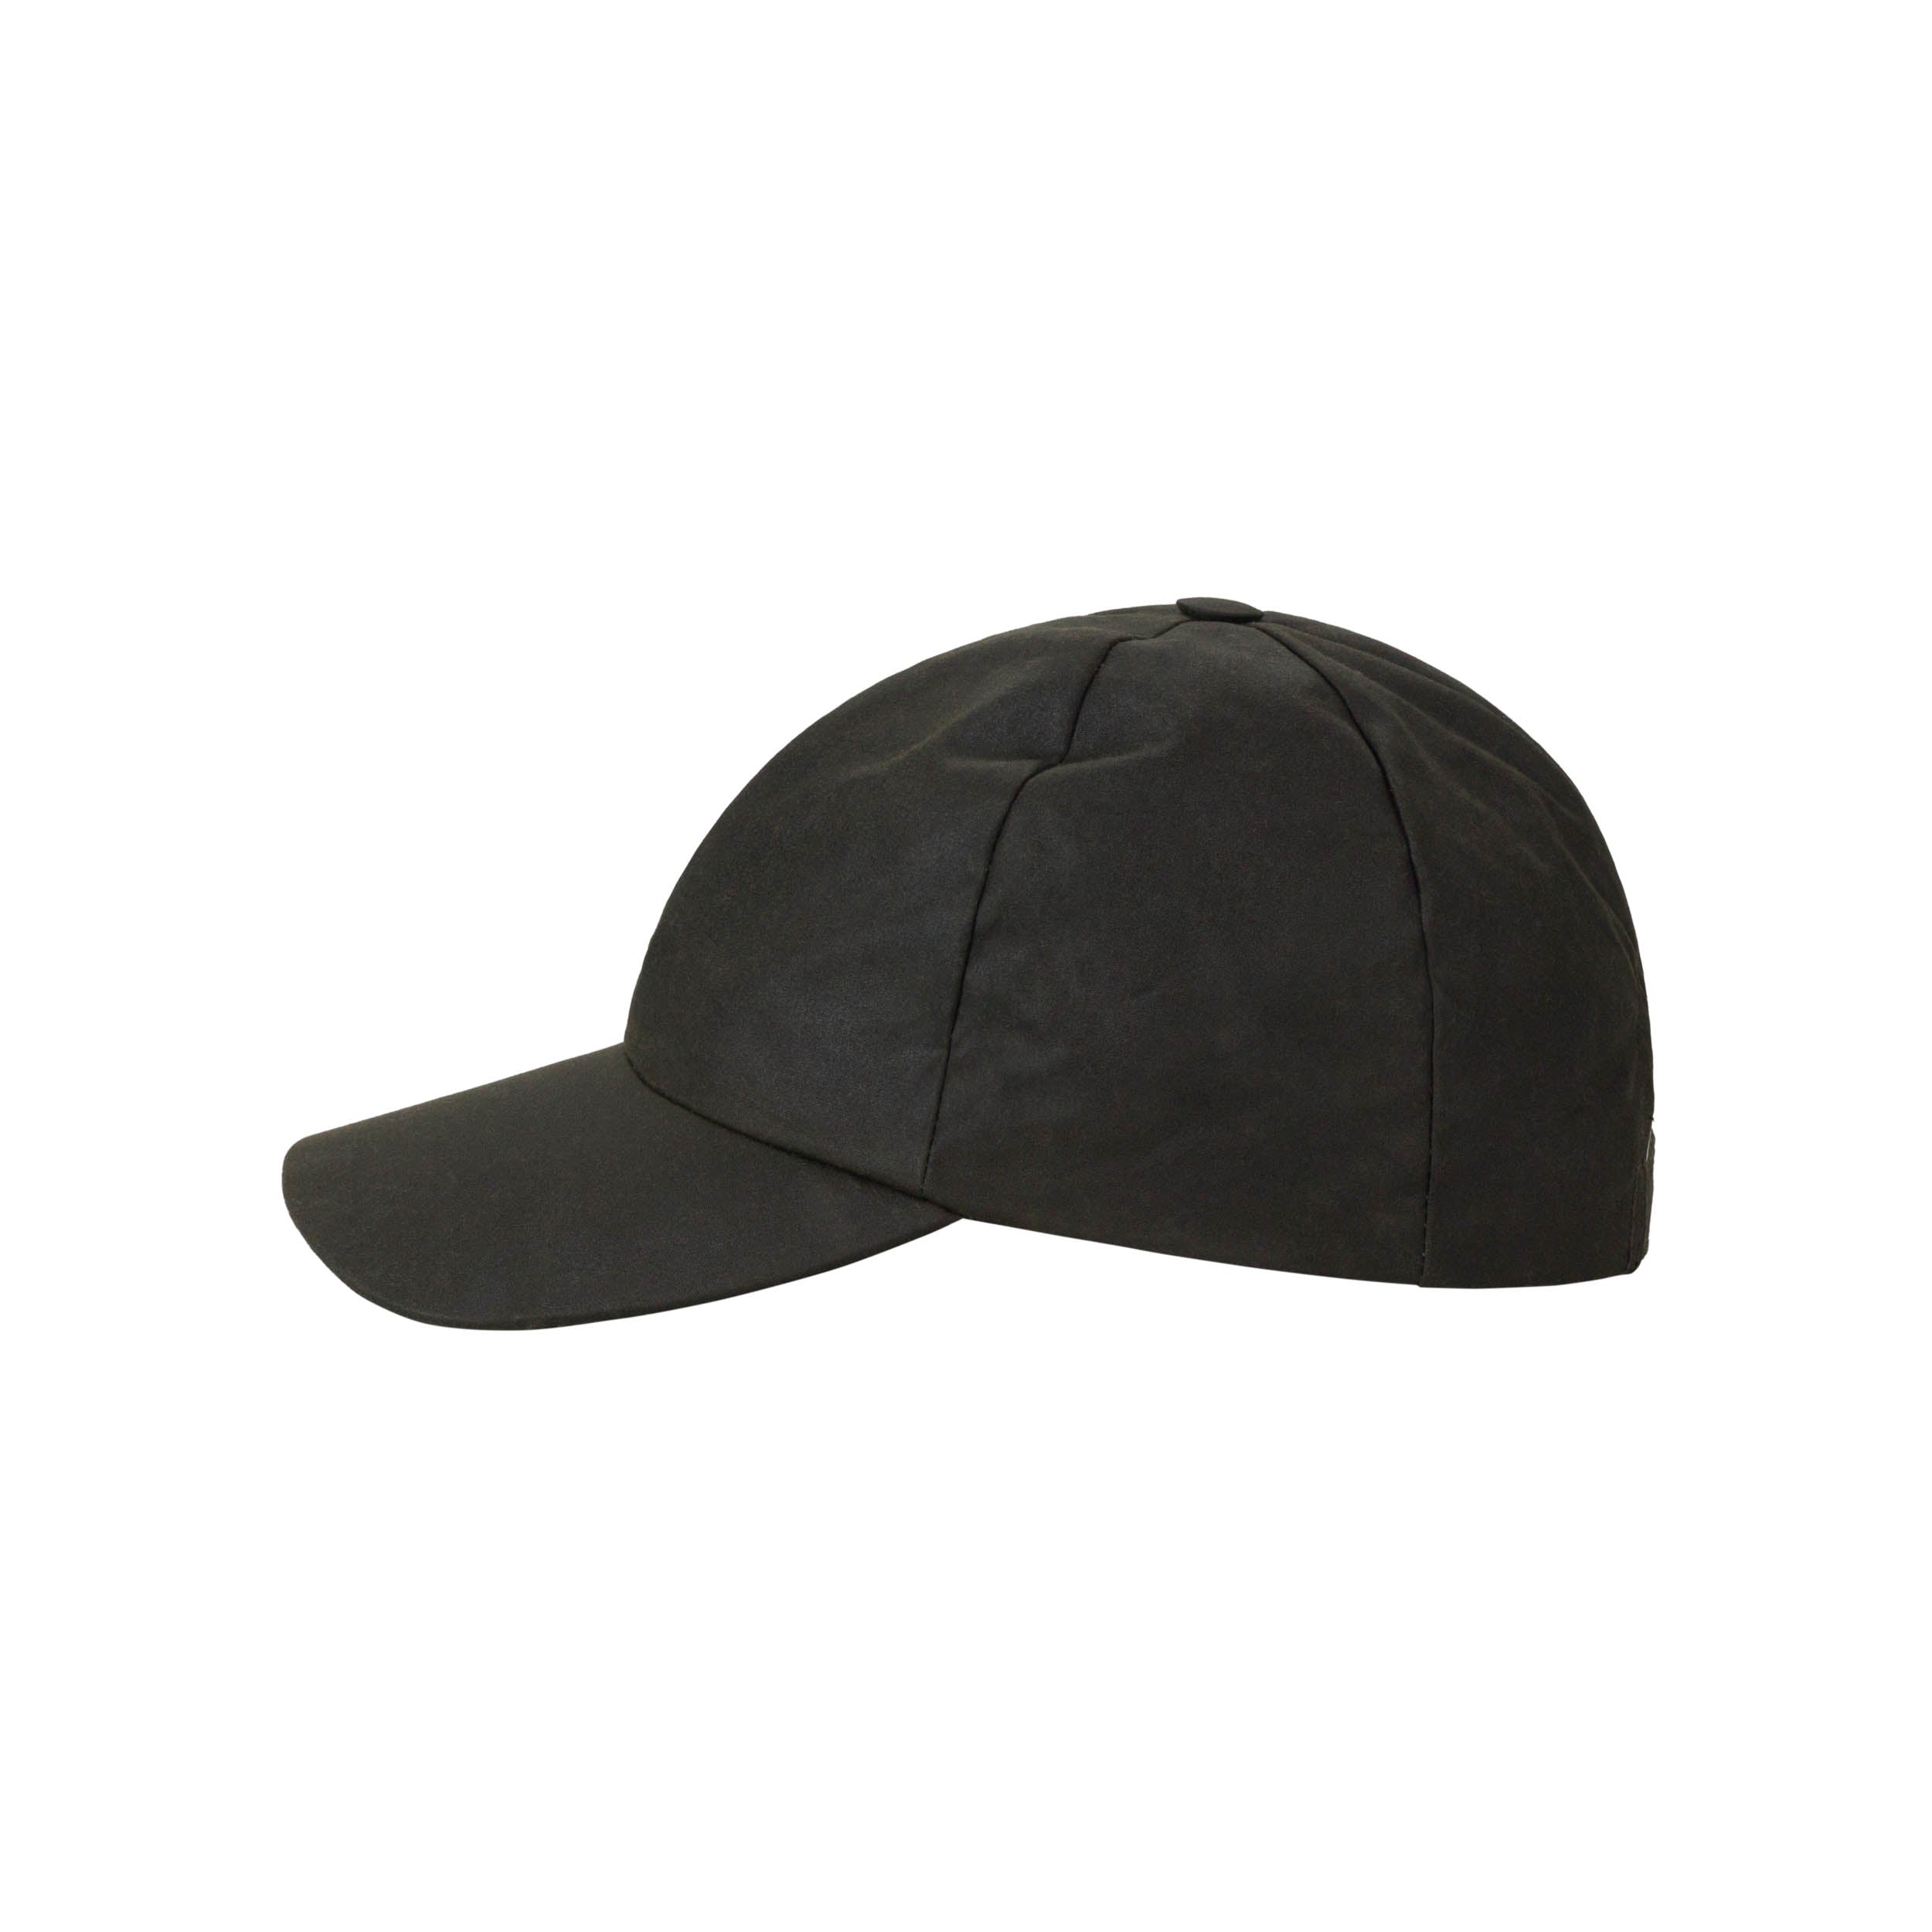 Carrier Company Waxed Cotton Baseball Cap in Dark Olive